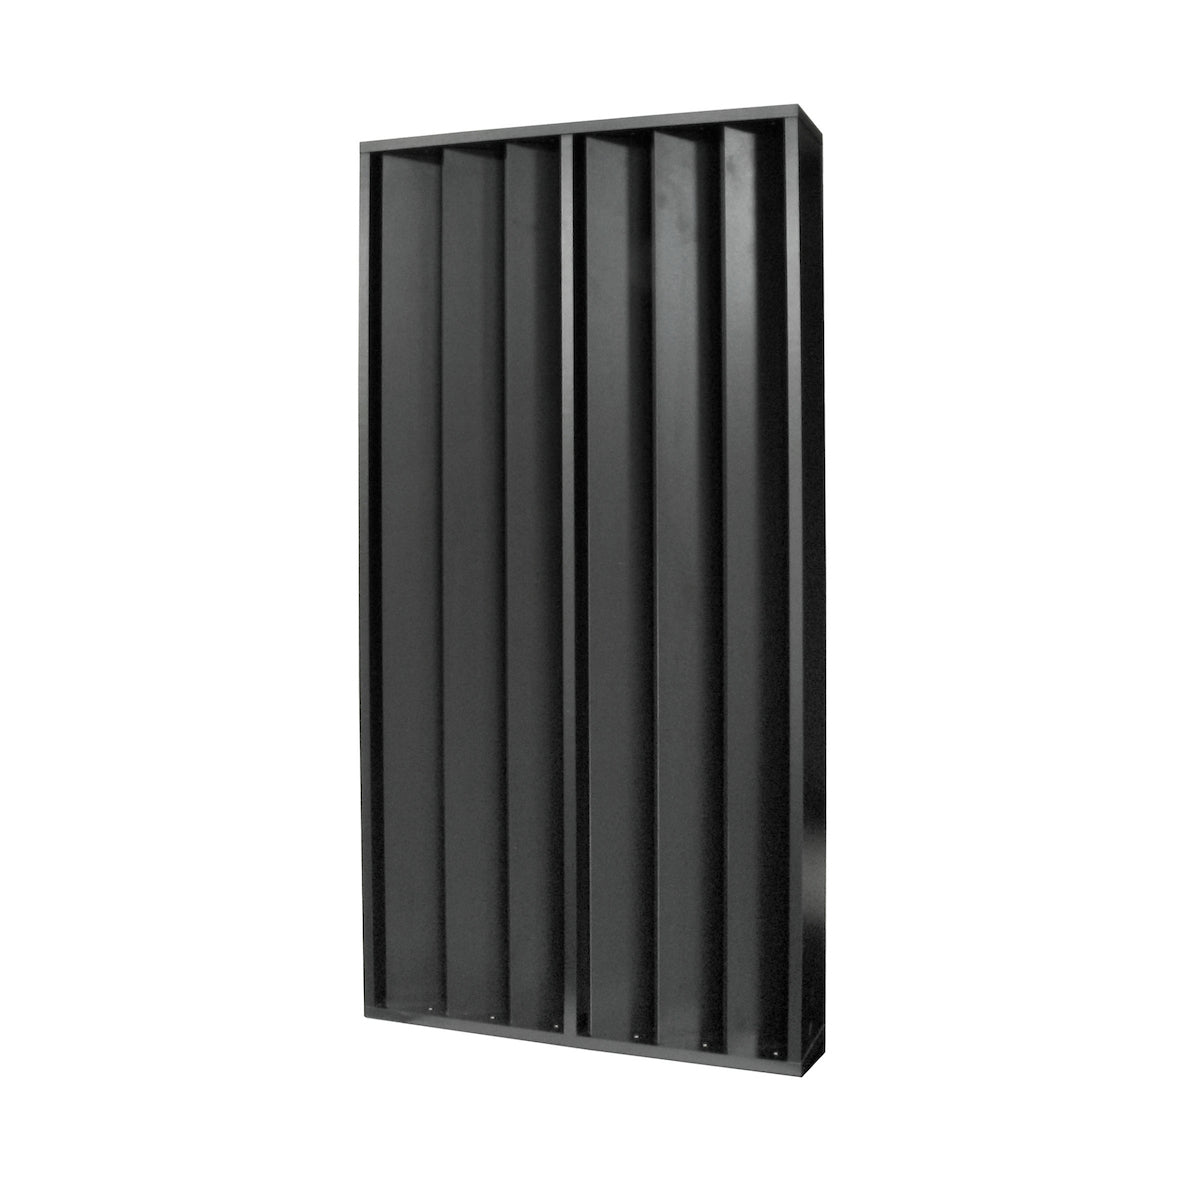 Primacoustic FlexiFuser - Variable Slat Acoustic Diffuser and Absorber